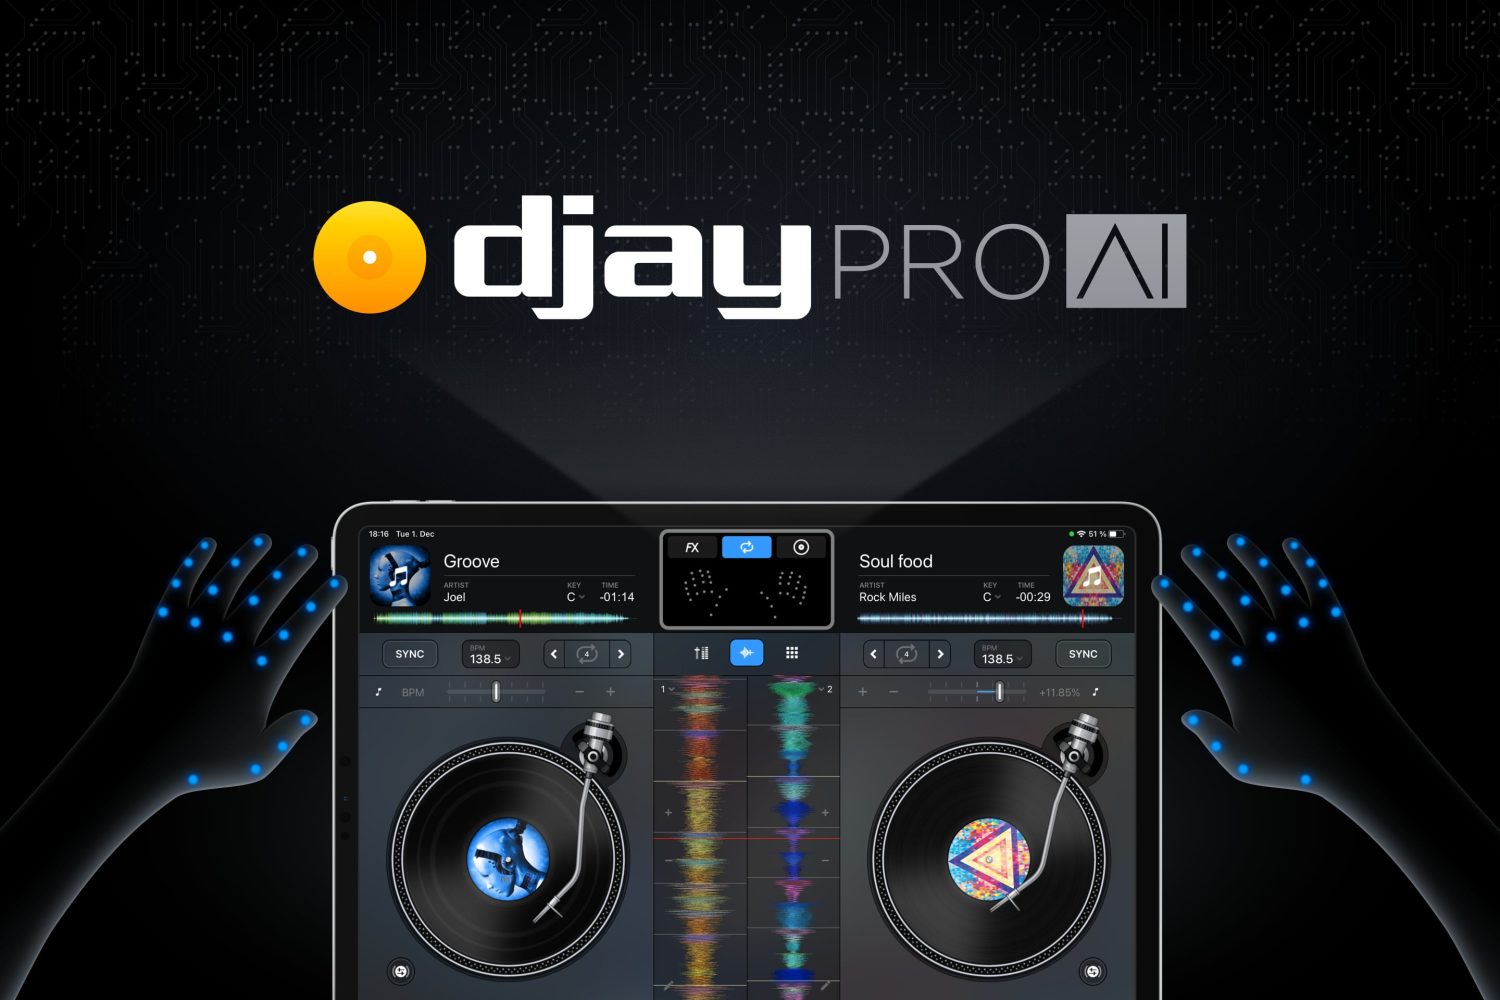 djay Pro AI for apple download free